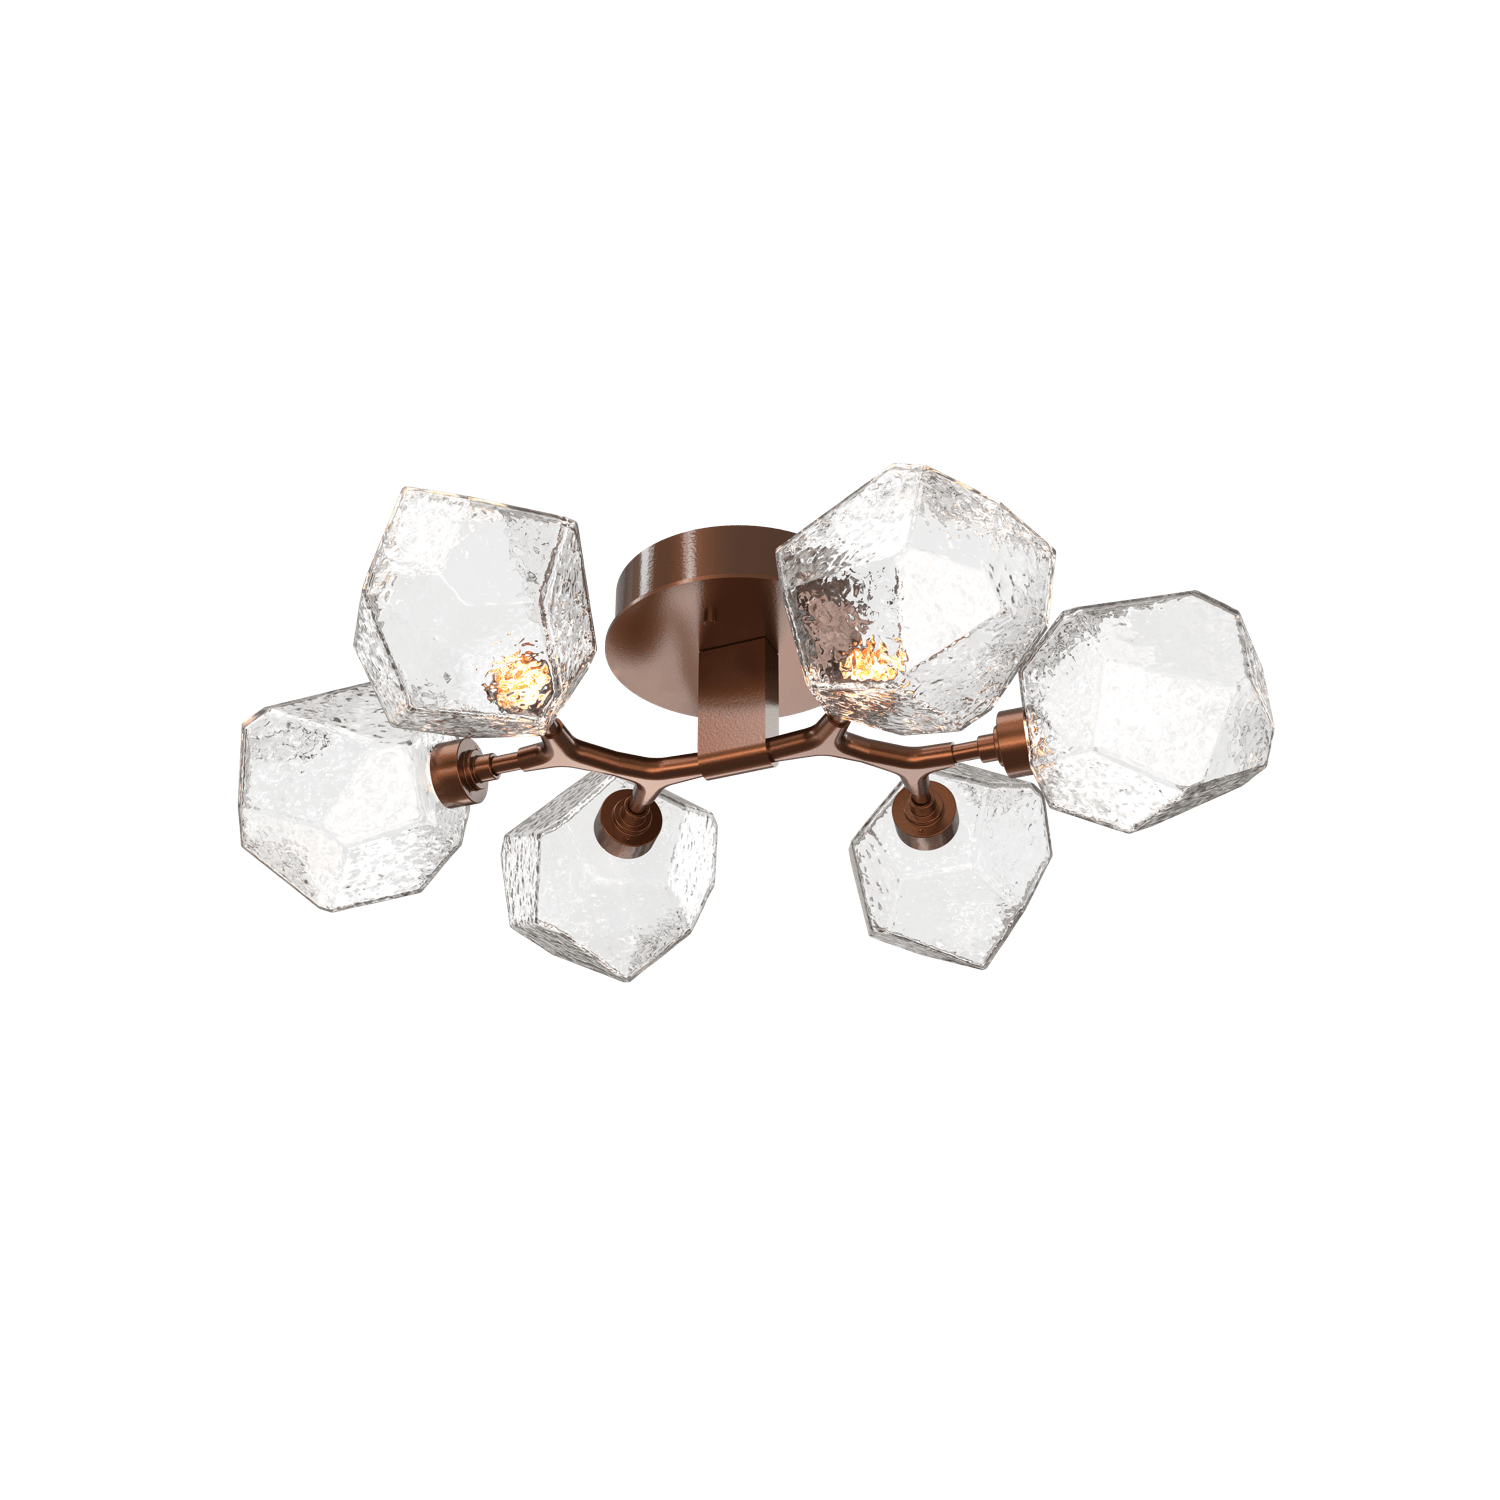 CLB0039-01-BB-C-Hammerton-Studio-Gem-6-light-organic-flush-mount-light-with-burnished-bronze-finish-and-clear-blown-glass-shades-and-LED-lamping